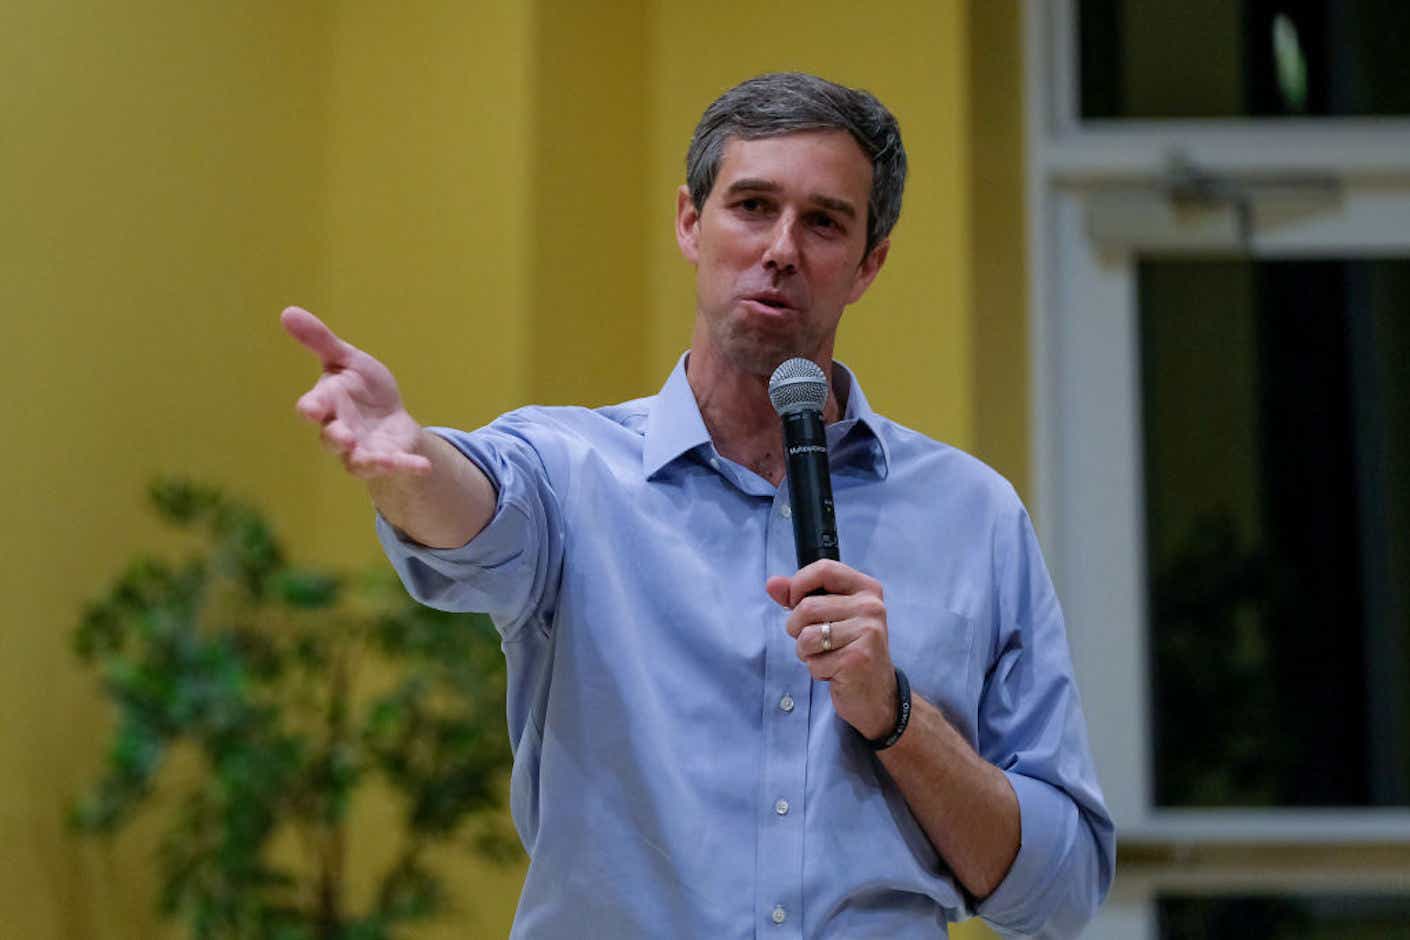 Presidential candidate Beto O'Rourke discusses gun violence